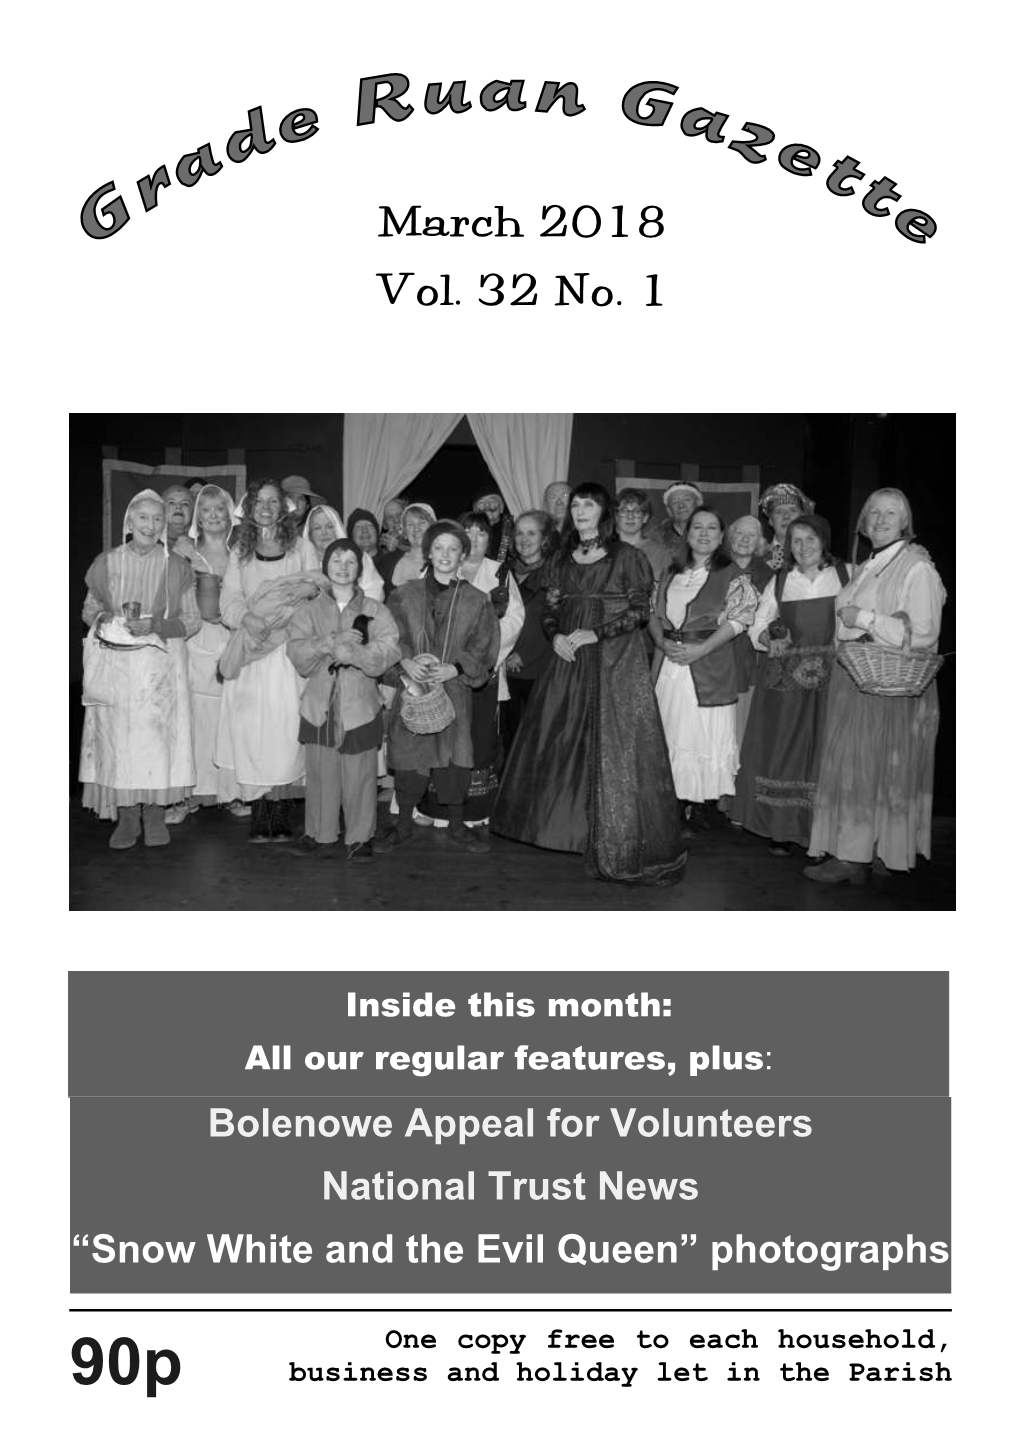 Bolenowe Appeal for Volunteers National Trust News “Snow White and the Evil Queen” Photographs